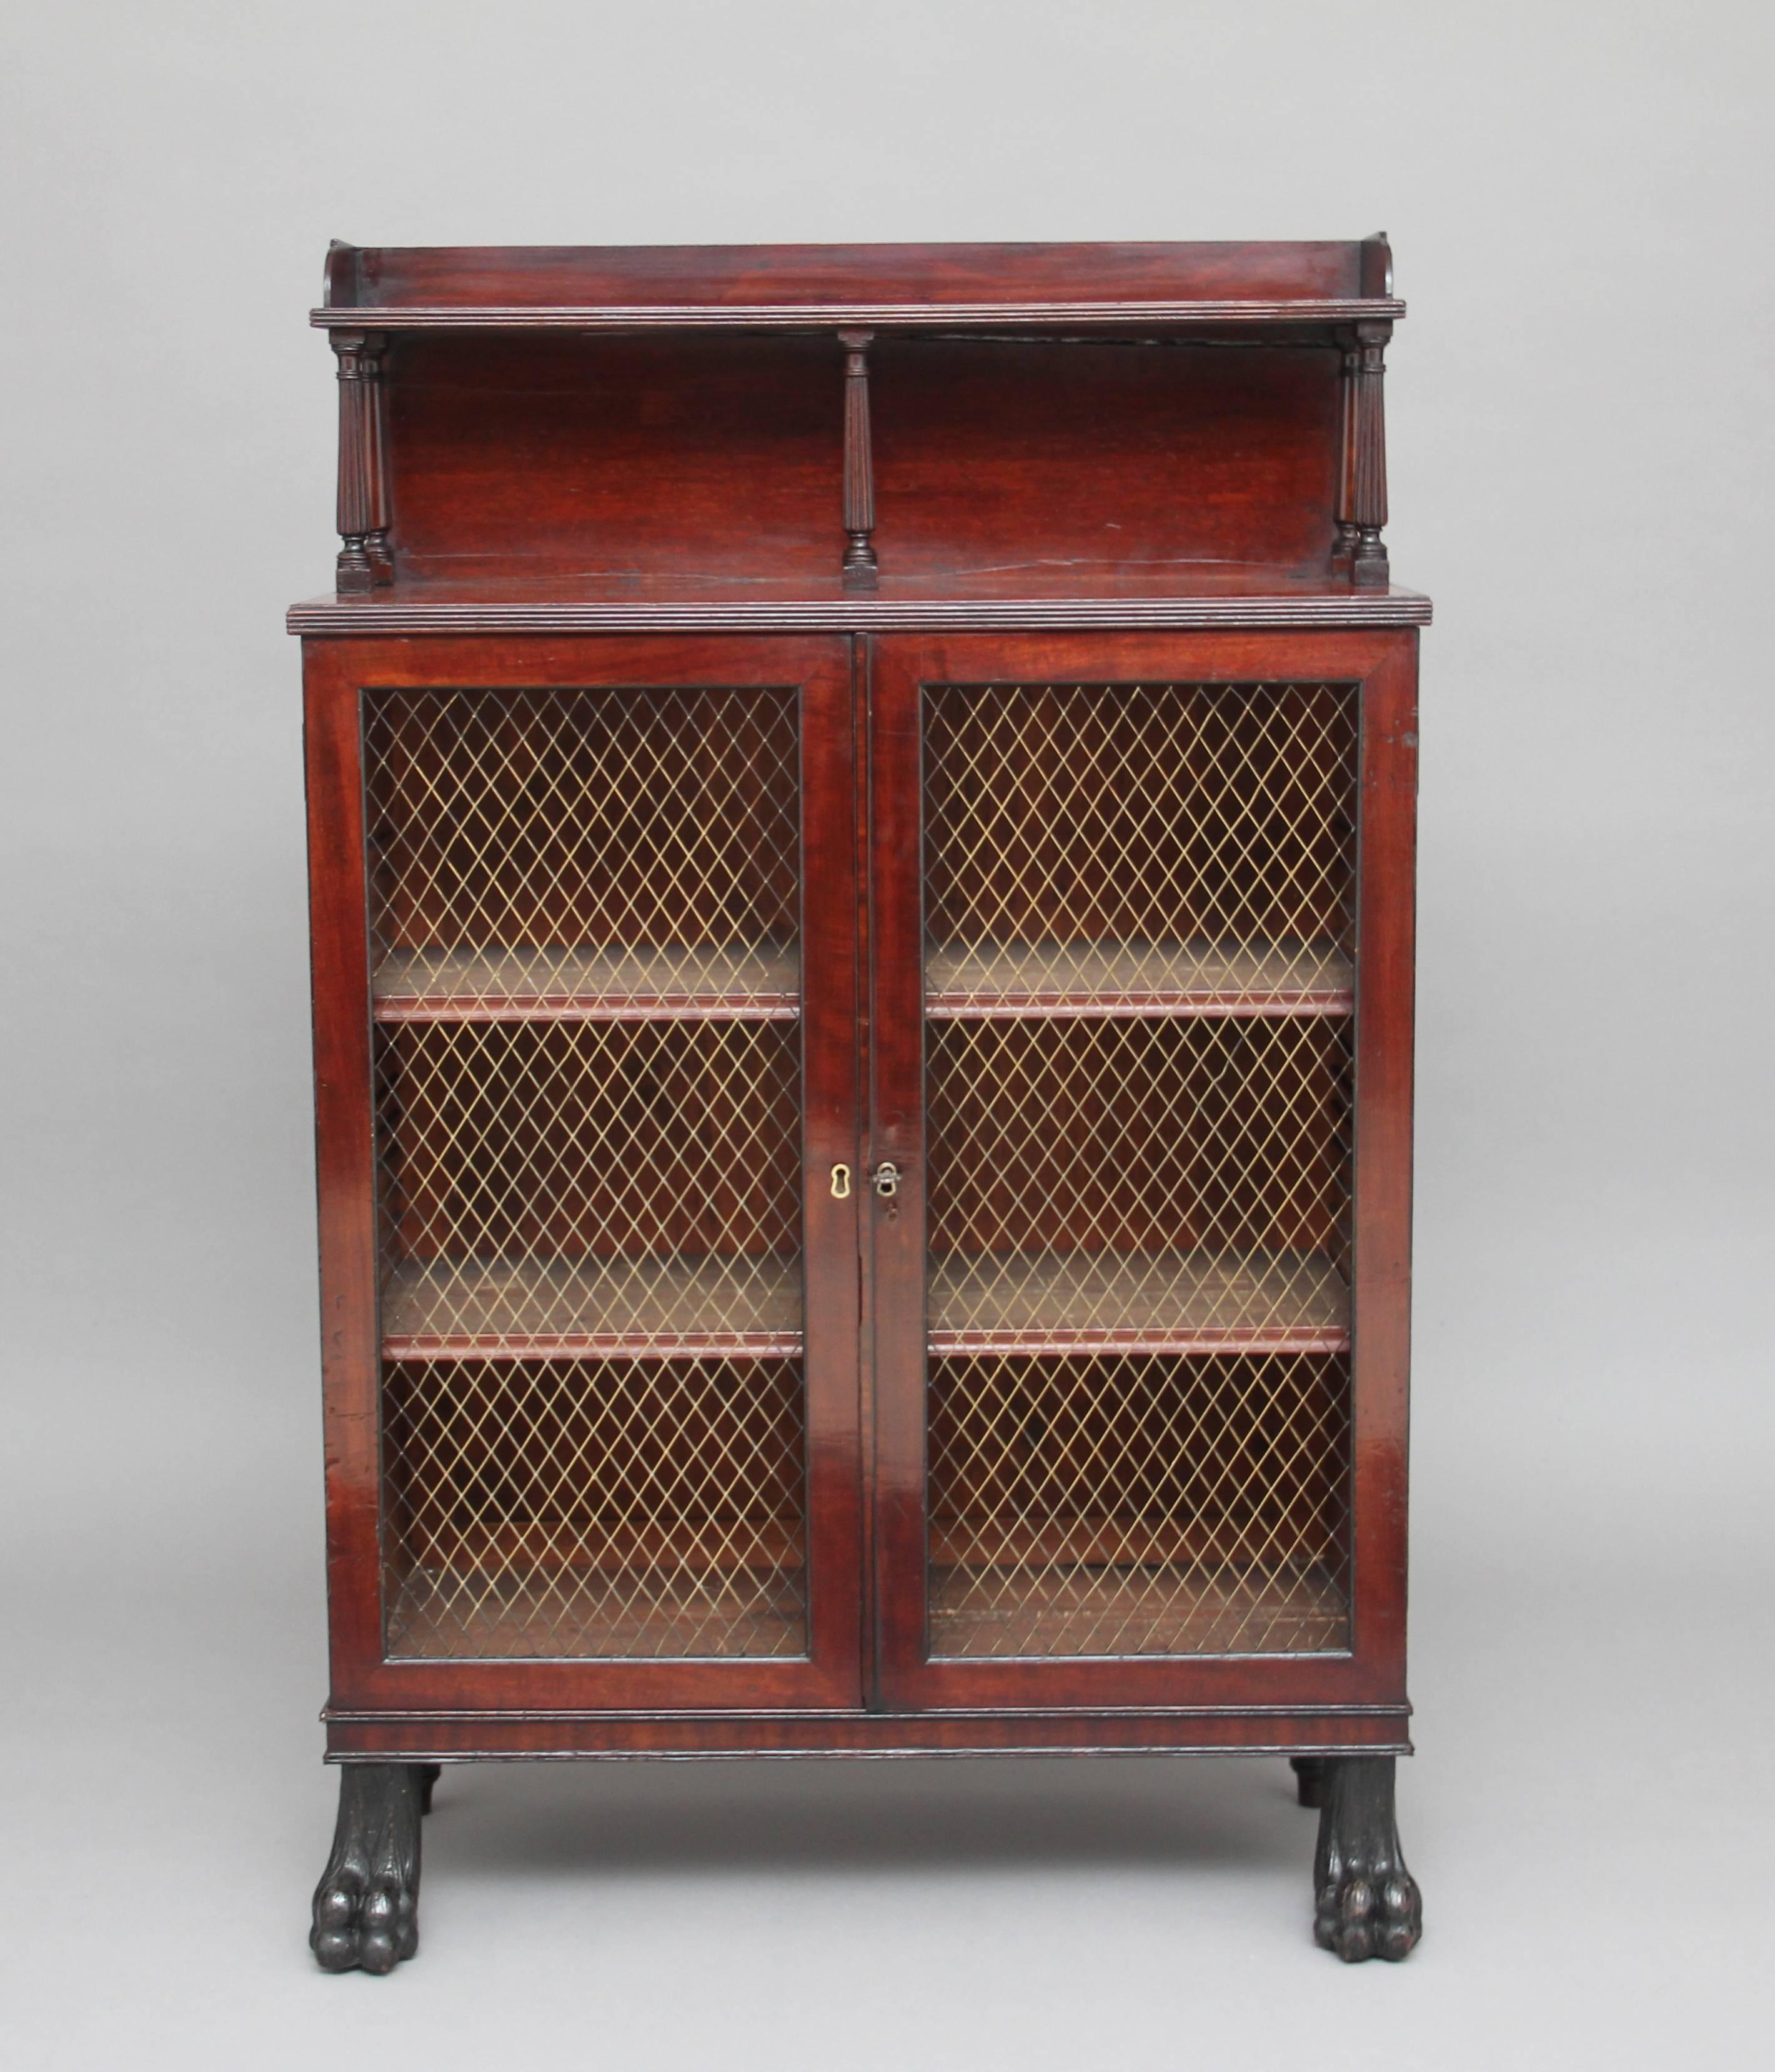 Early 19th century mahogany bookcase or cabinet of good proportions, the top section having a shelf with a reeded edge and a shaped gallery running along the sides and front, supported on five turned columns, the cabinet having two doors with brass